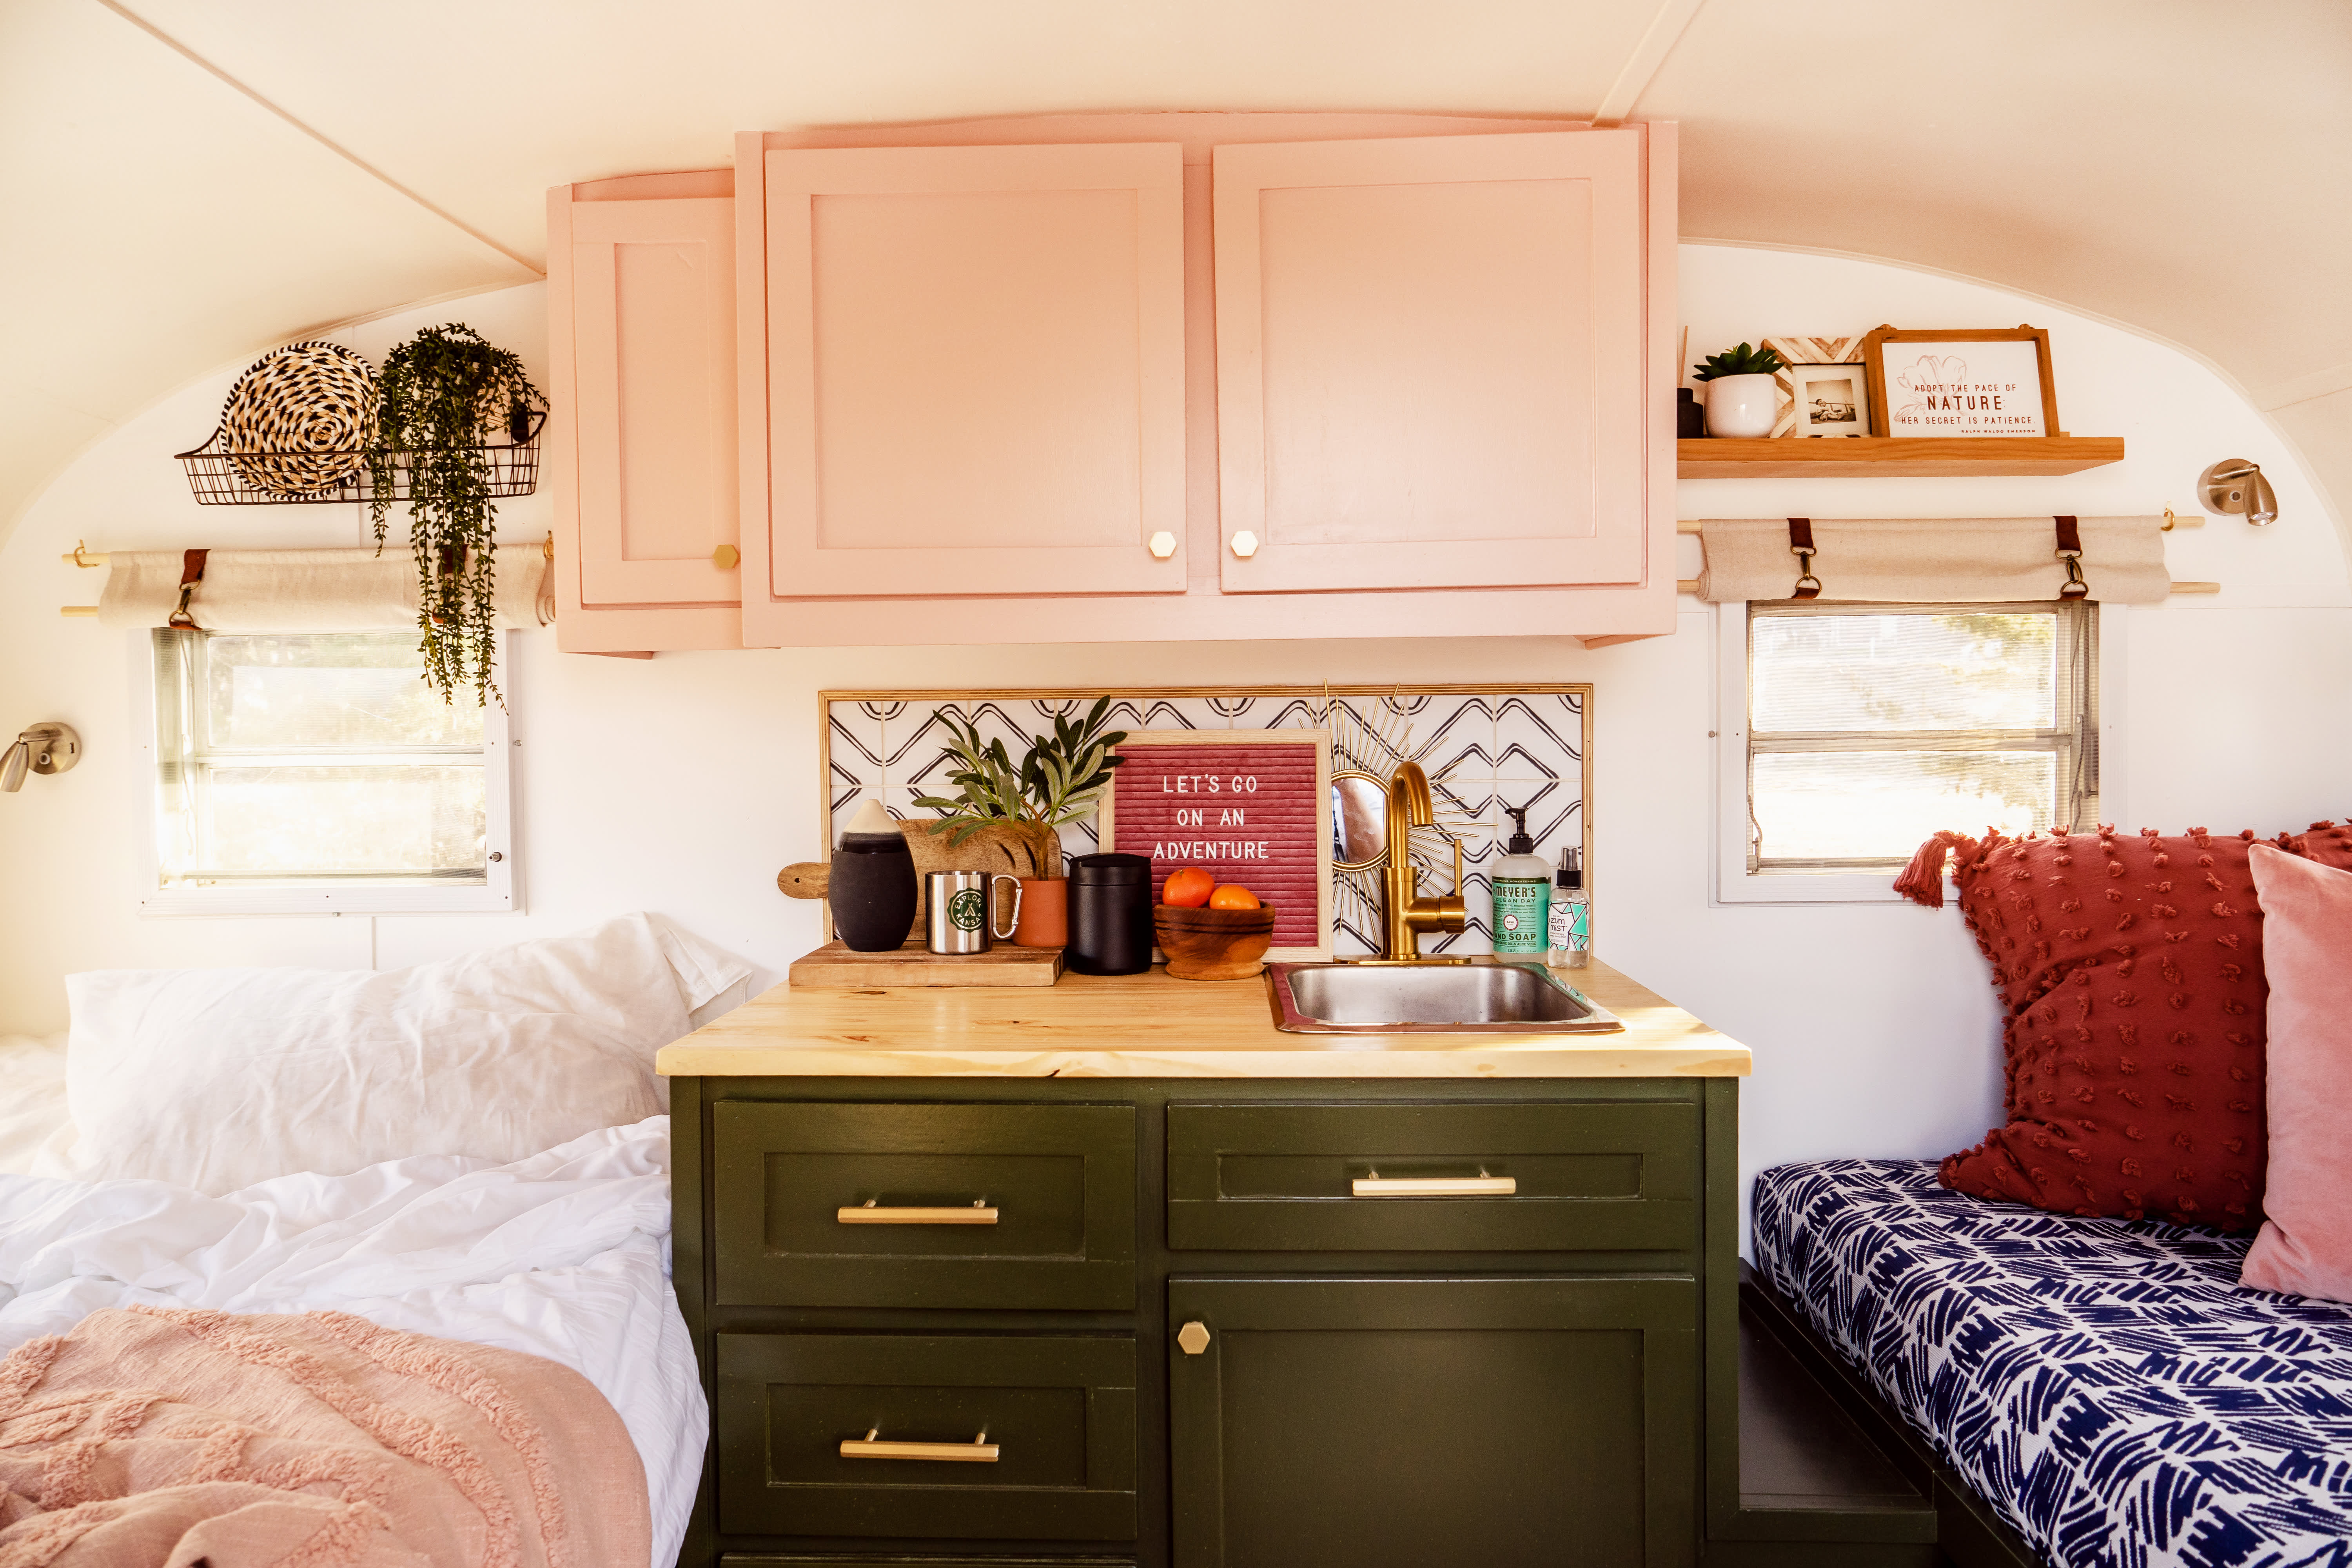 Country-Style Camper Bedroom Ideas to Decorate Your Cozy RV